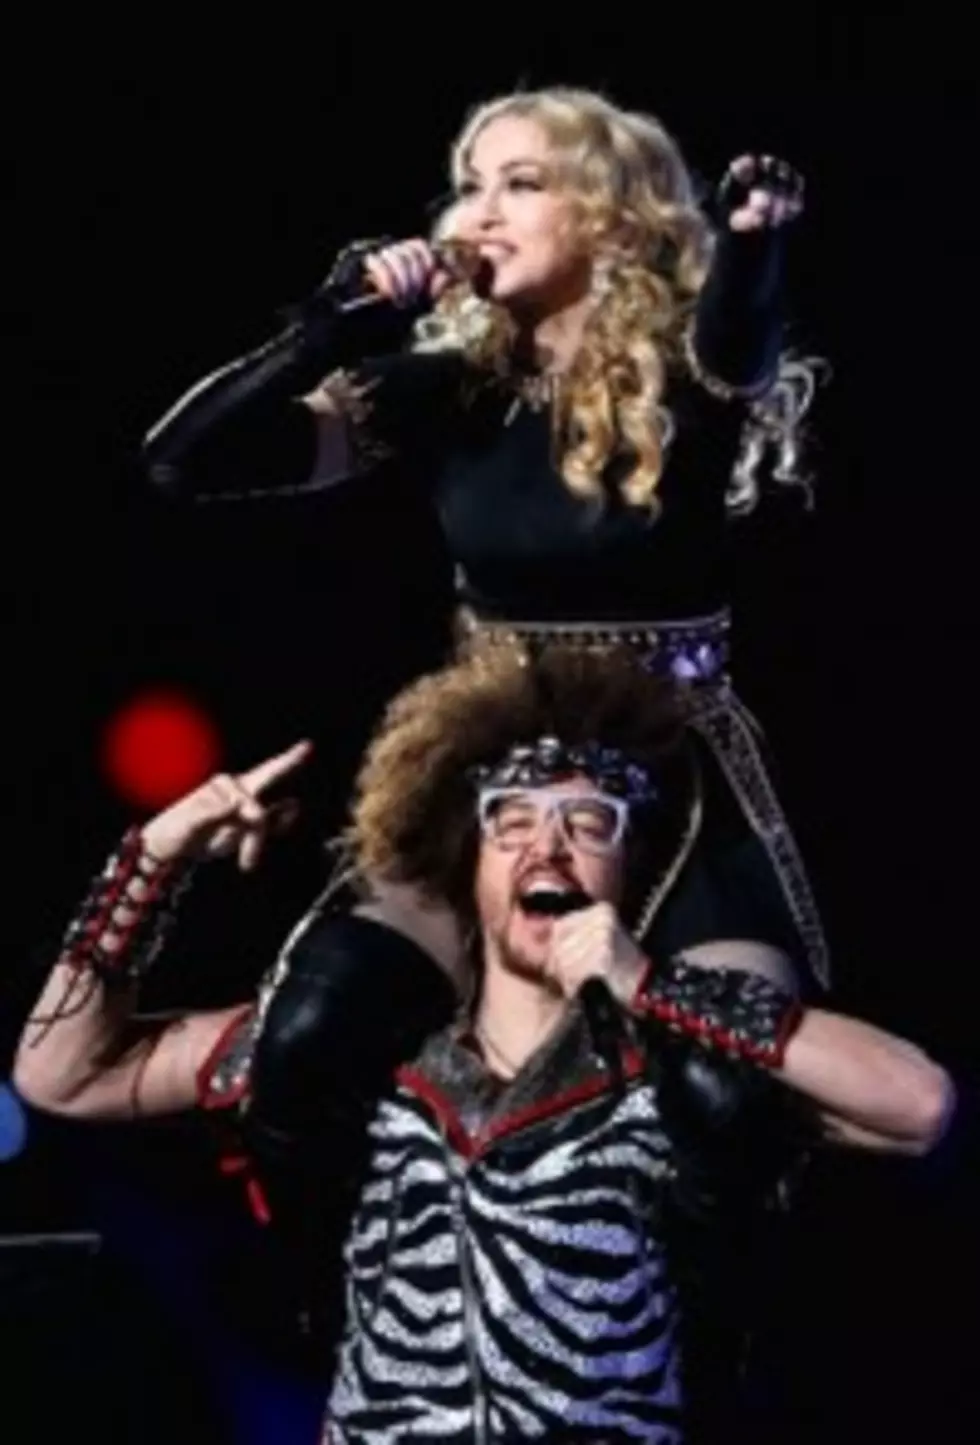 LMFAO’s Redfoo Recalls Giving Madonna a Ride on Super Bowl Sunday